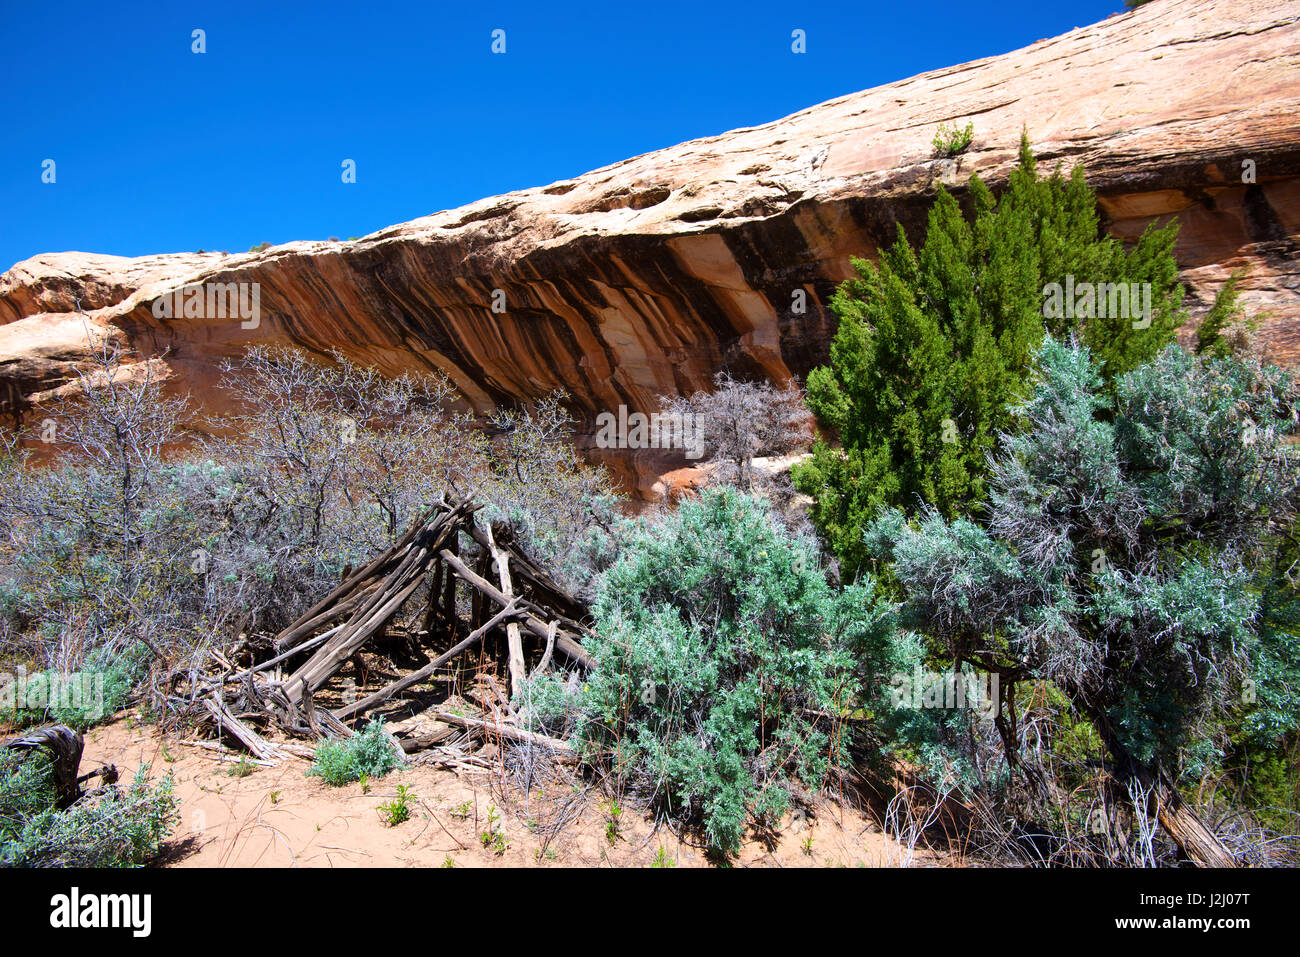 Double Stack Anasazi ruin in Butler Wash, Cedar Mesa, Utah. Butler Wash ruins. A 200 year-old Navajo wikiup in the Double-Stack canyon. (Large format sizes available) Stock Photo